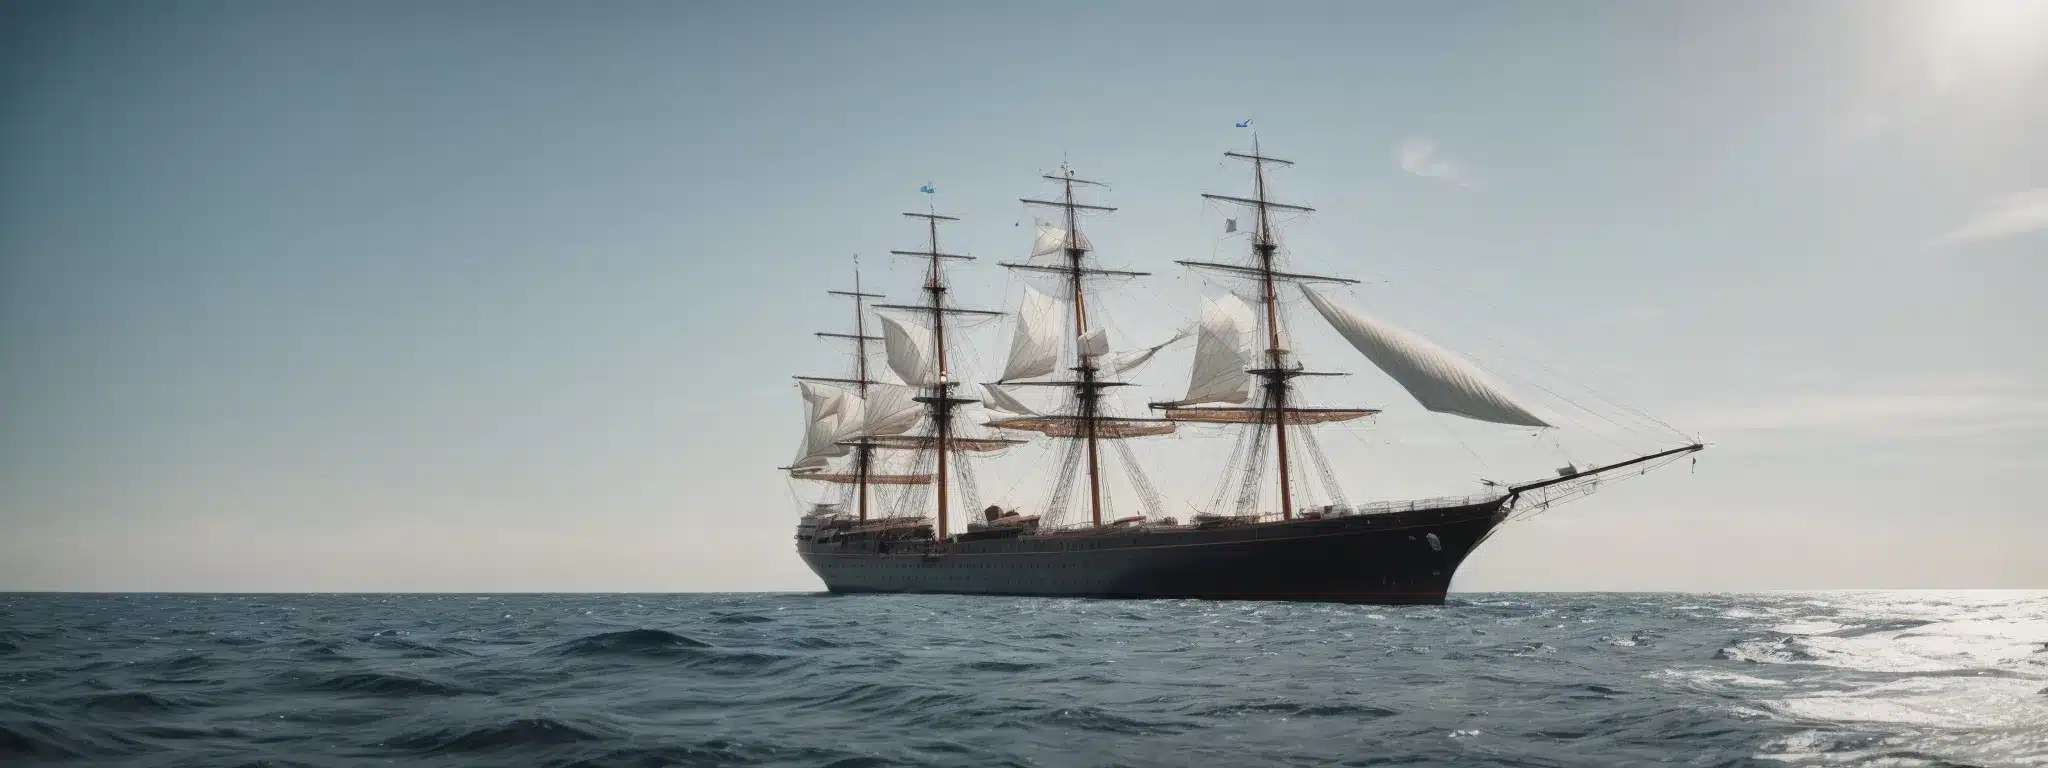 A Stately Ship Sailing Clear Waters Under A Wide, Open Sky As A Metaphor For Navigating Brand Strategy.